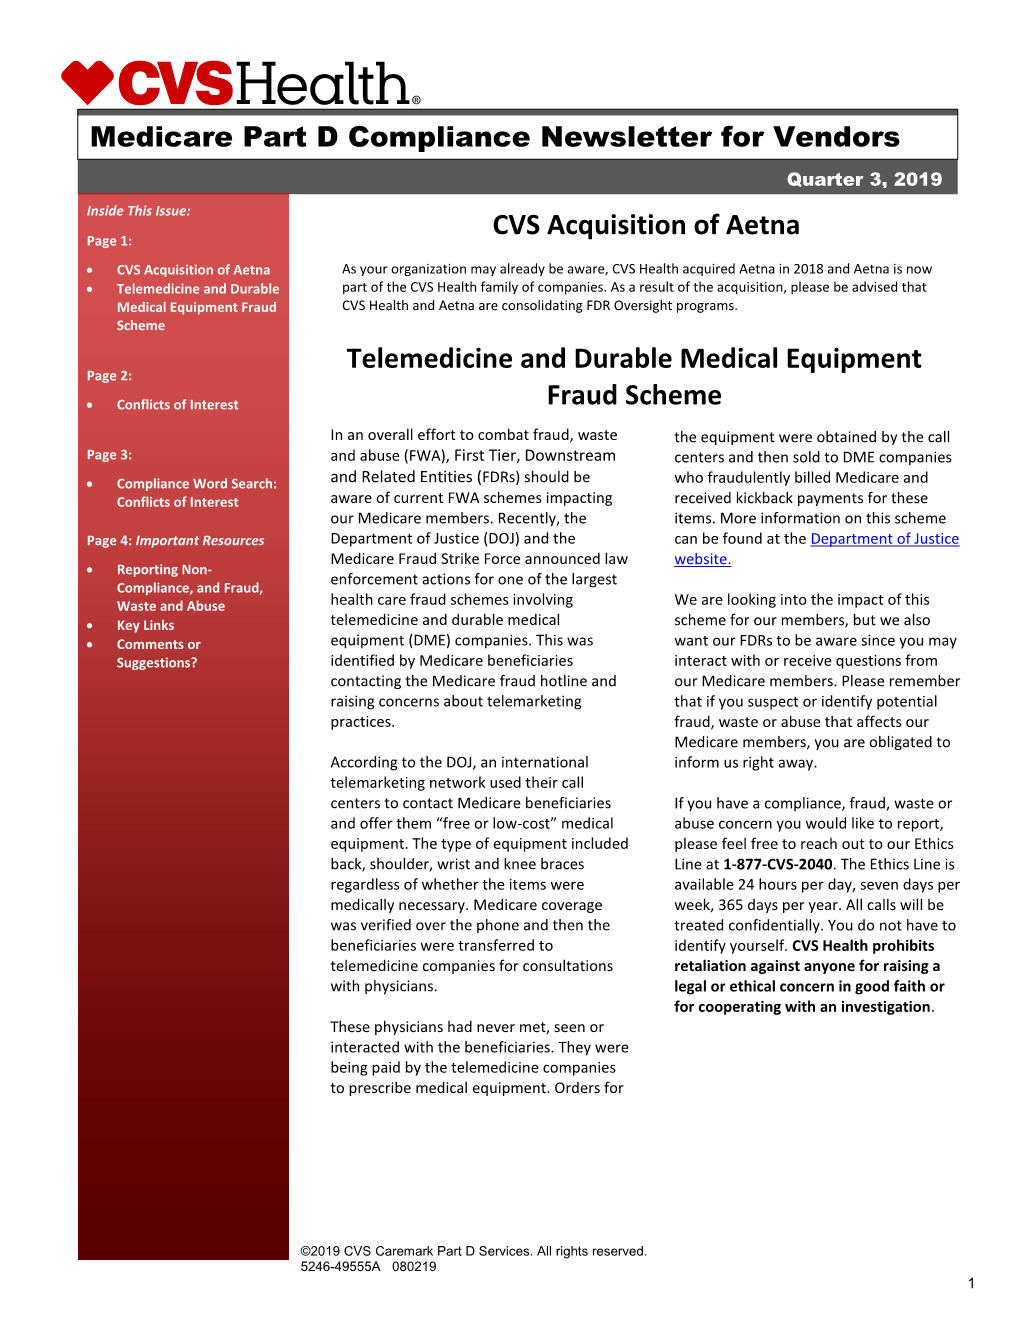 CVS Acquisition of Aetna Telemedicine and Durable Medical